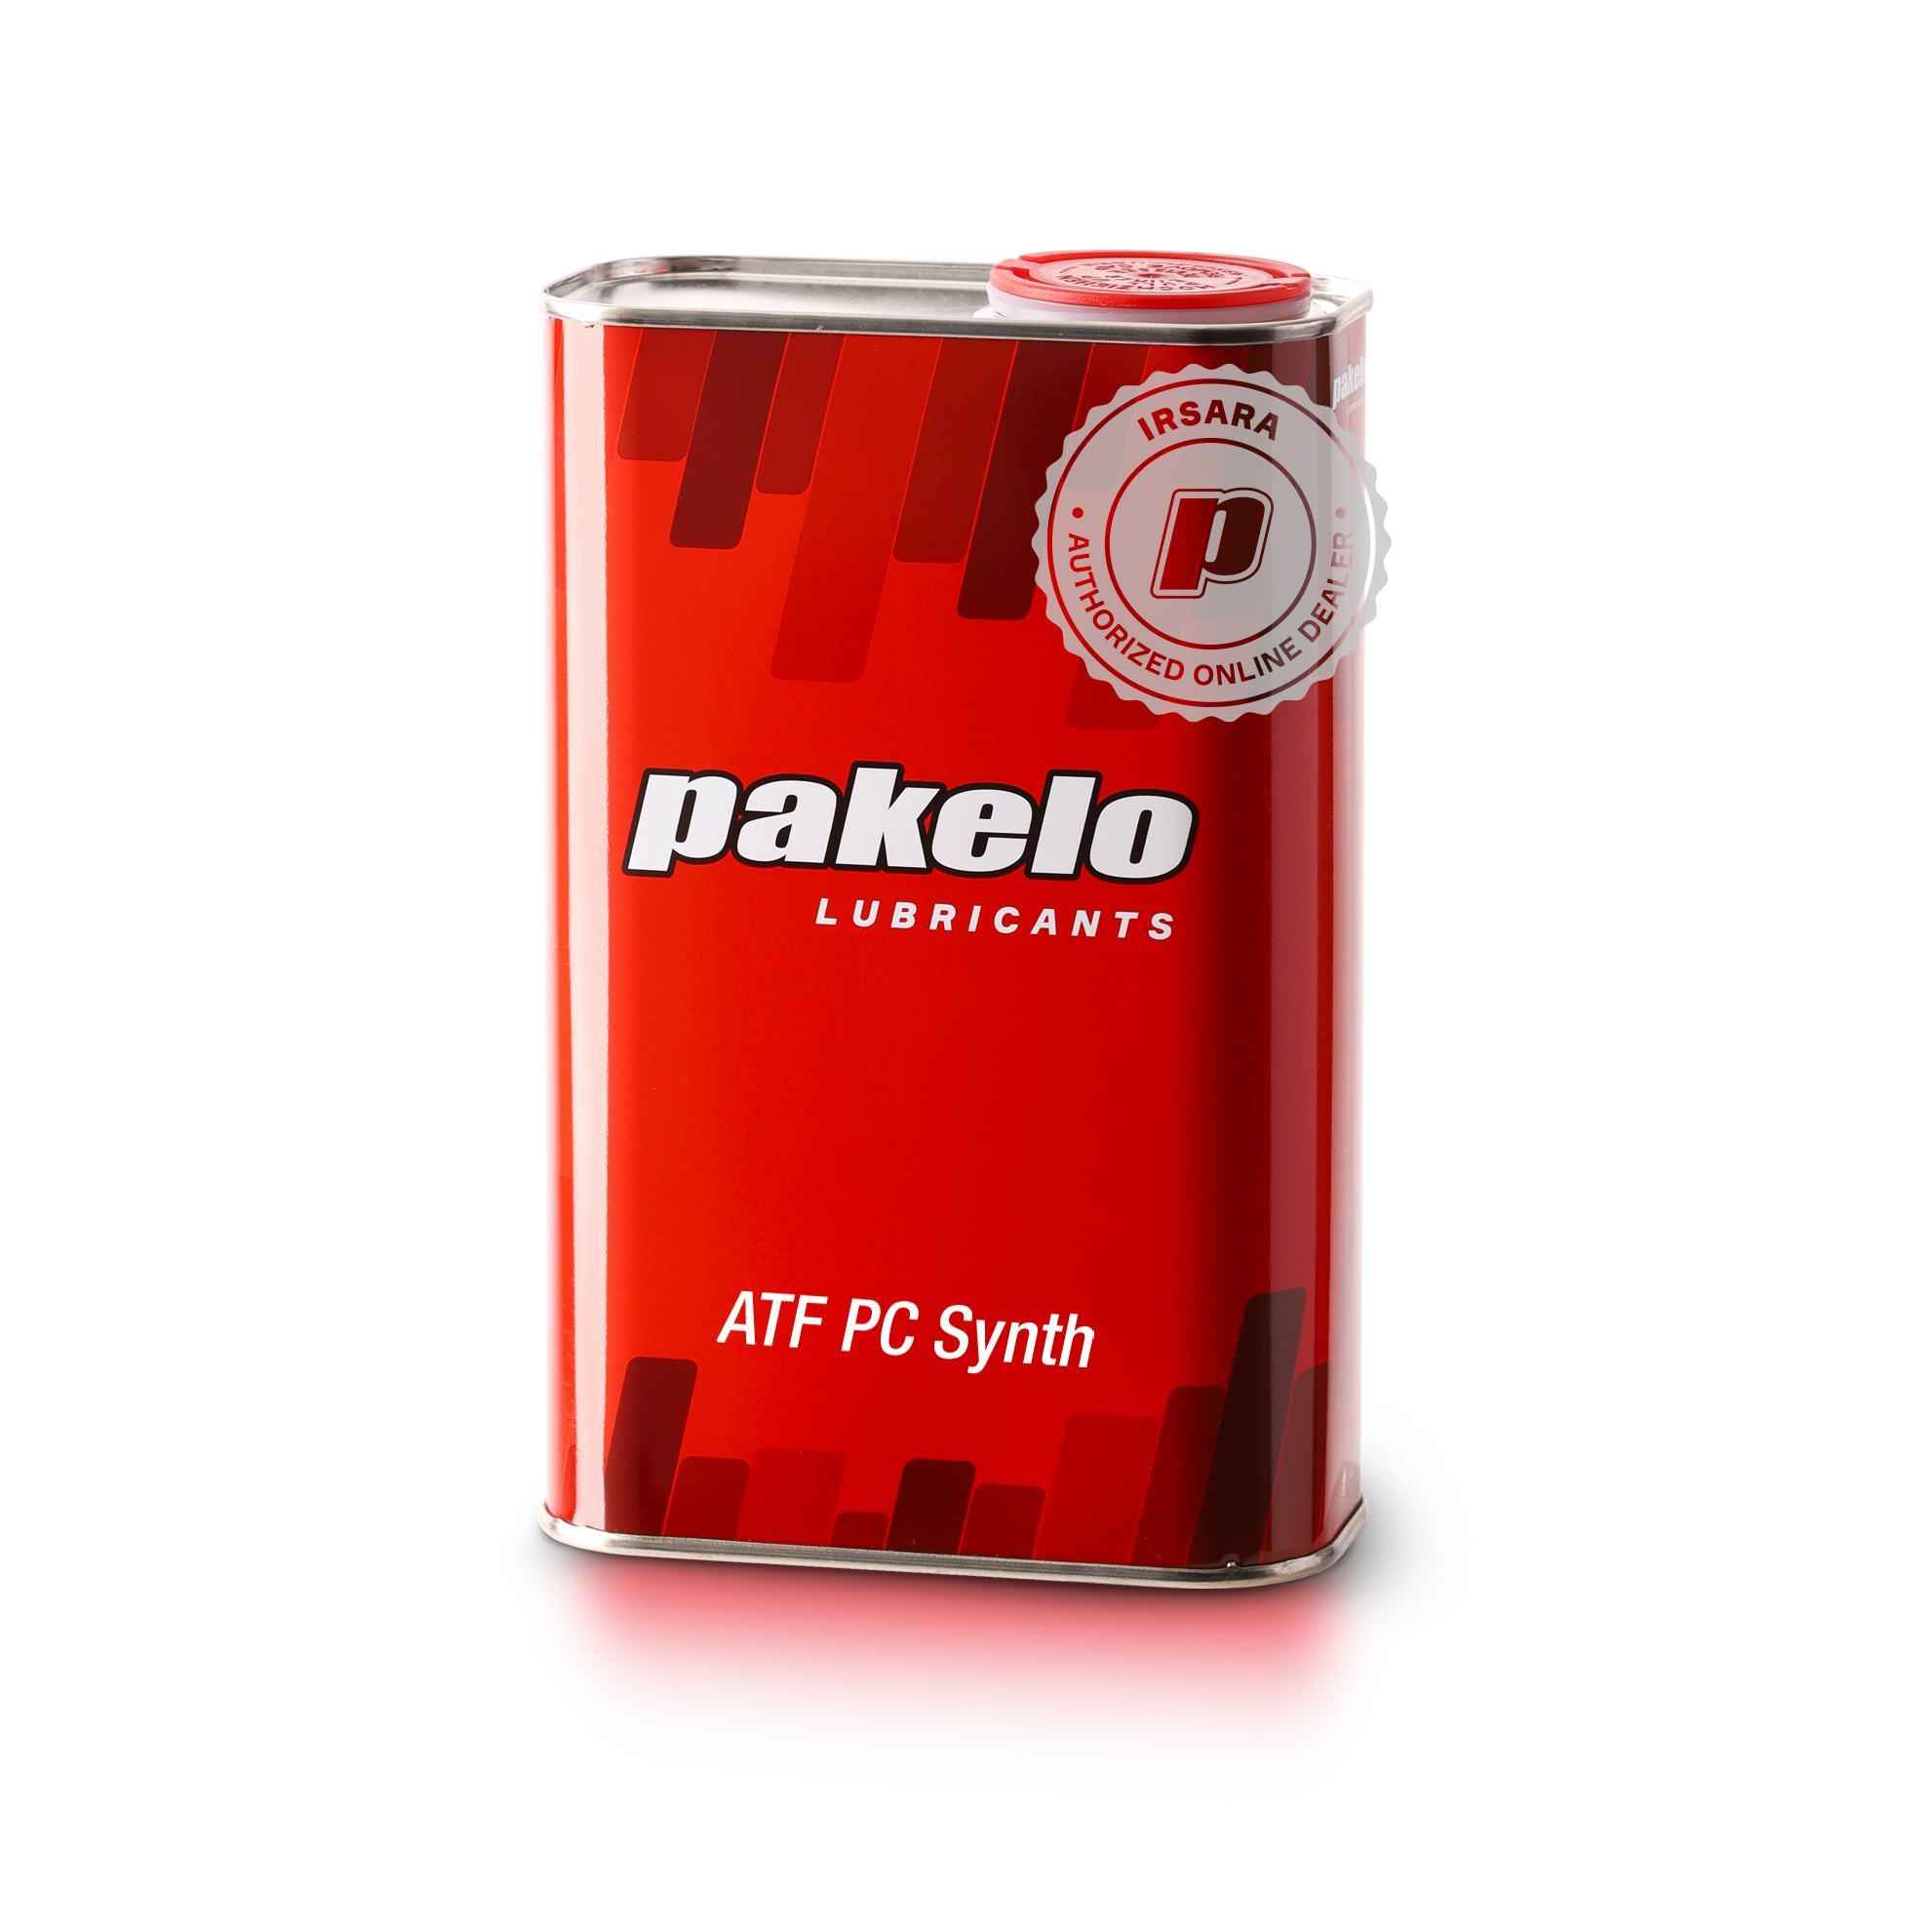 PAKELO ATF PC SYNTH (1 L)